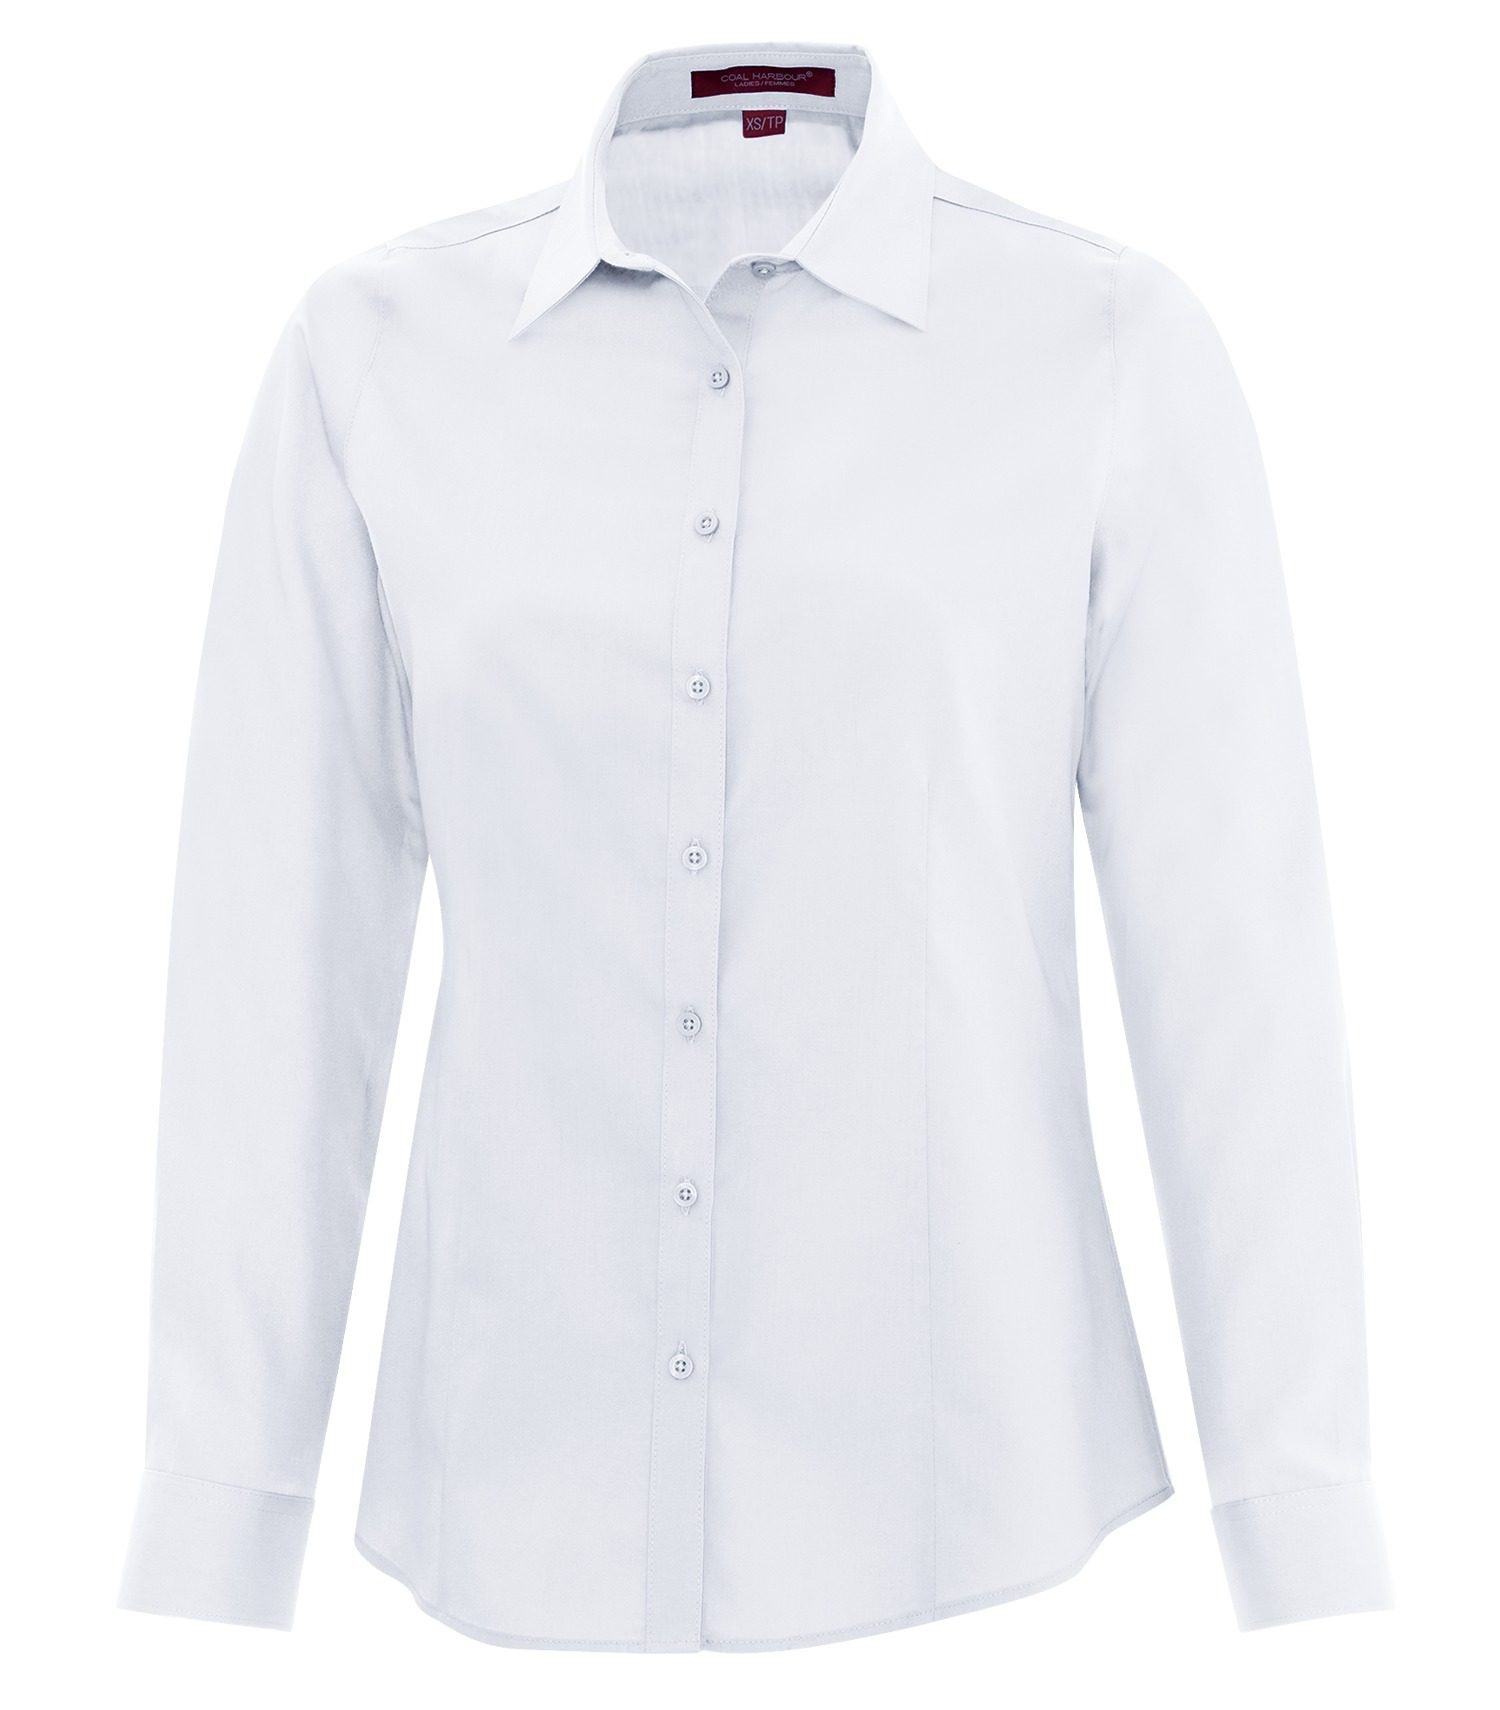 COAL HARBOUR® EVERYDAY LONG SLEEVE LADIES' WOVEN SHIRT #L6013 True White